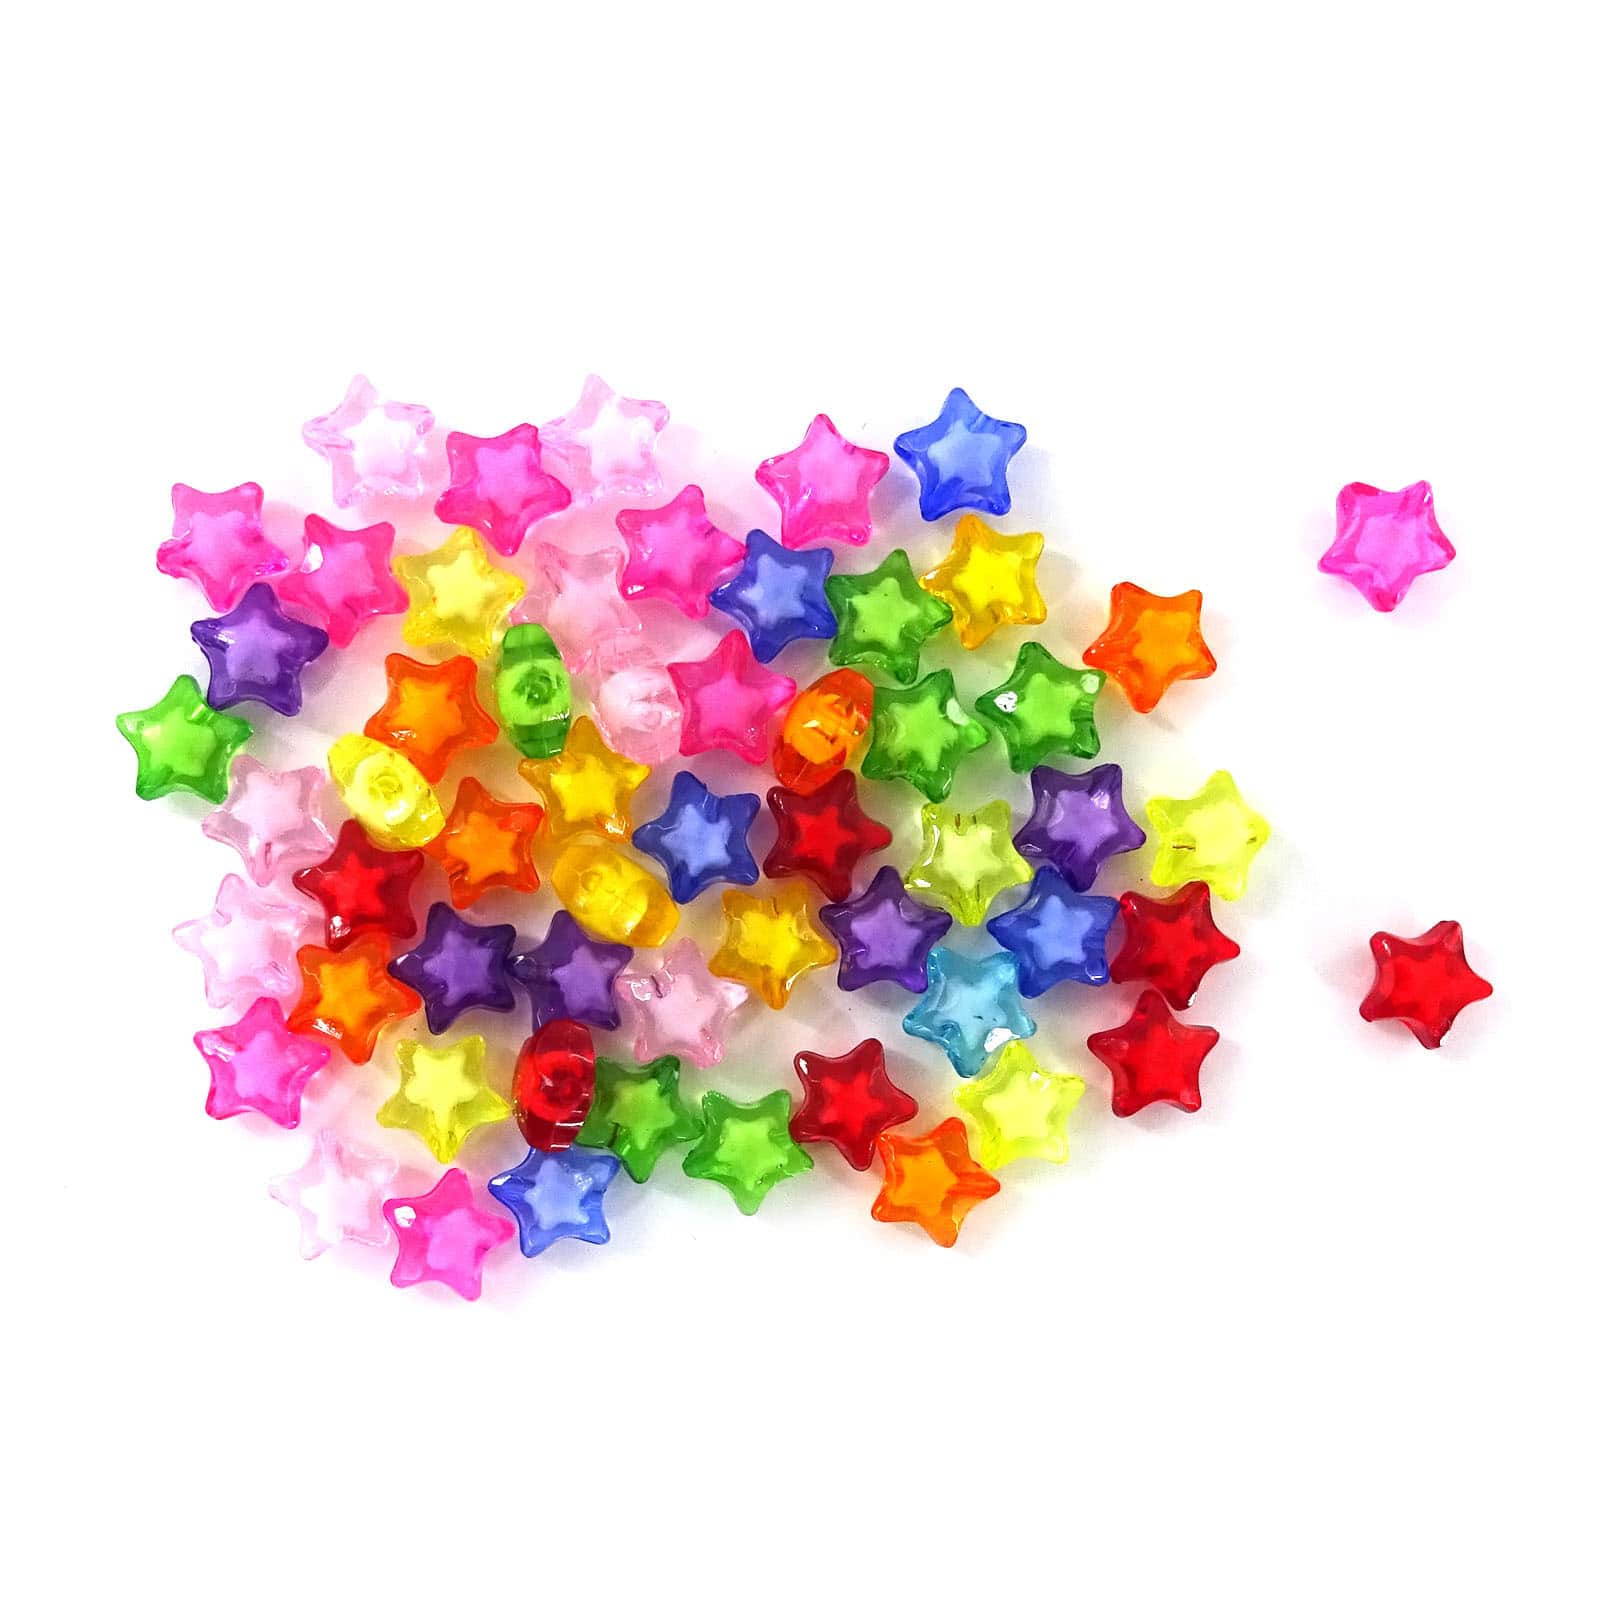 Pearlized Star Beads by Creatology™, 10mm